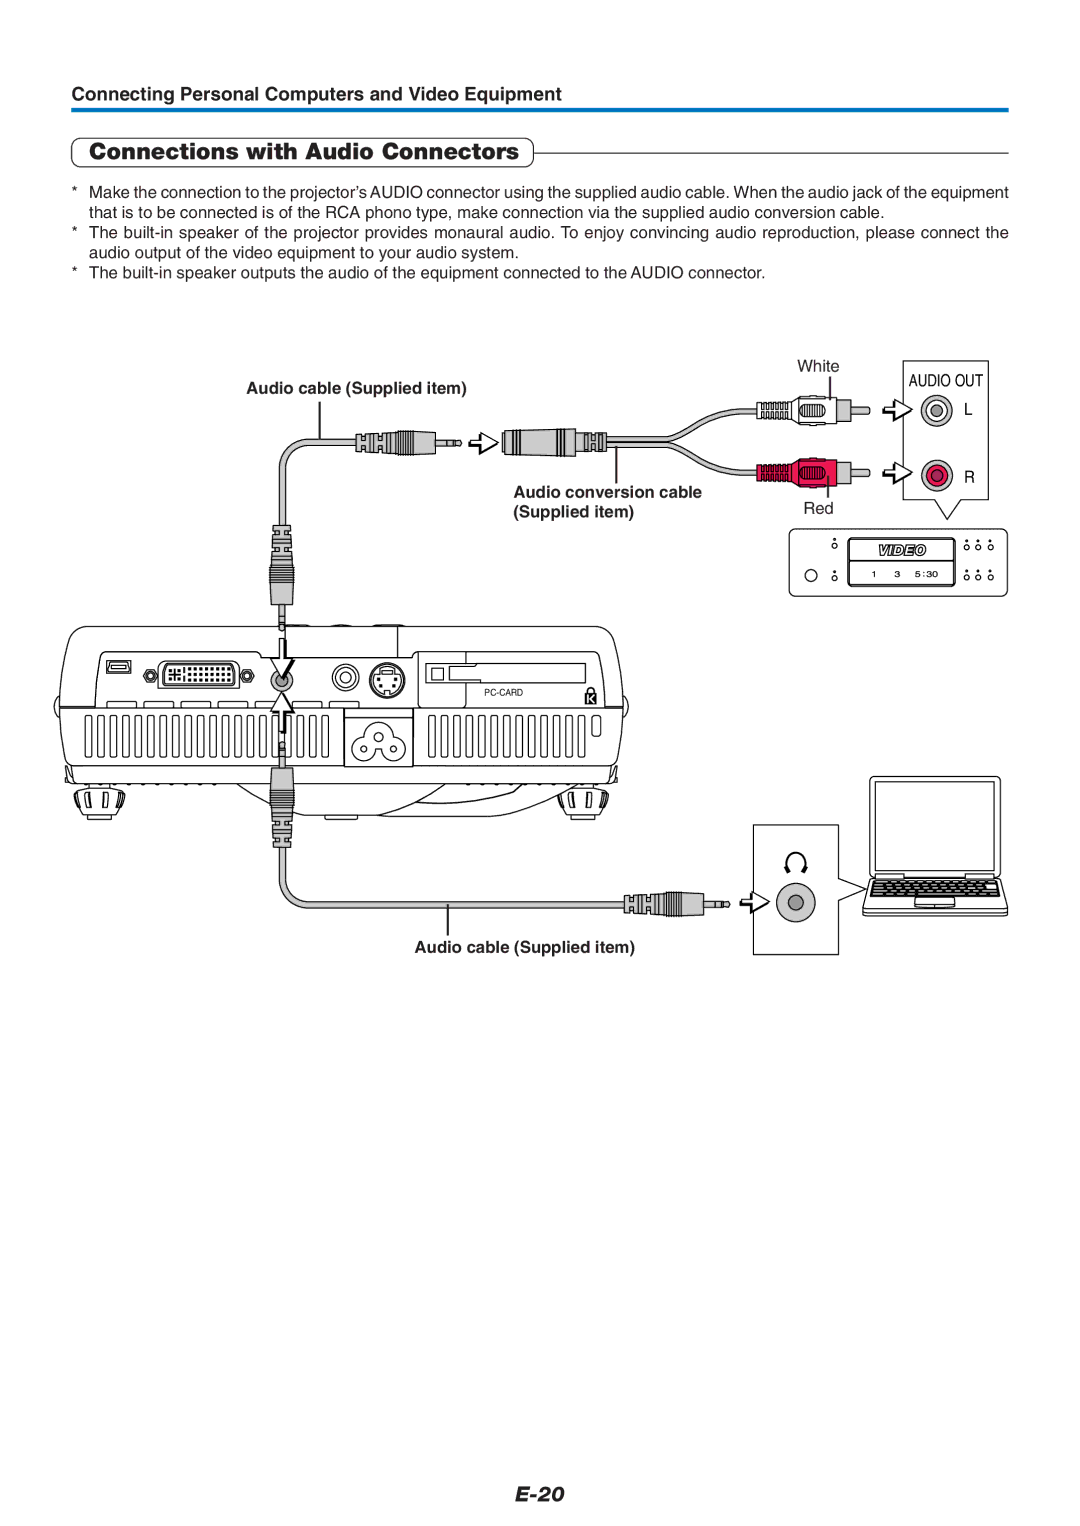 PLUS Vision U4-237 user manual Connections with Audio Connectors, Audio cable Supplied item, Audio conversion cable 